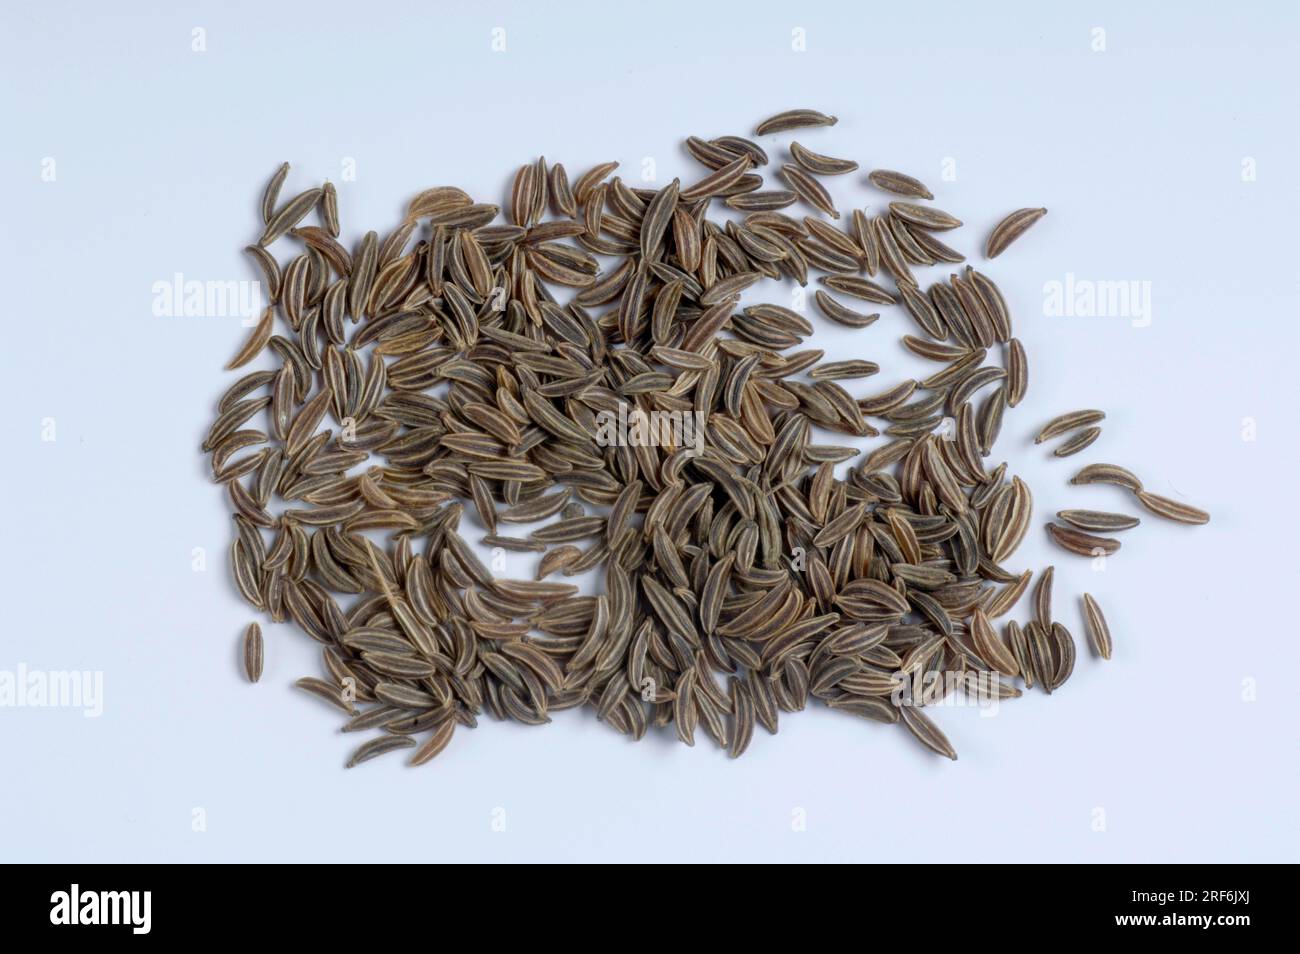 Common Caraway (Carum carvi), Caraway seed Stock Photo